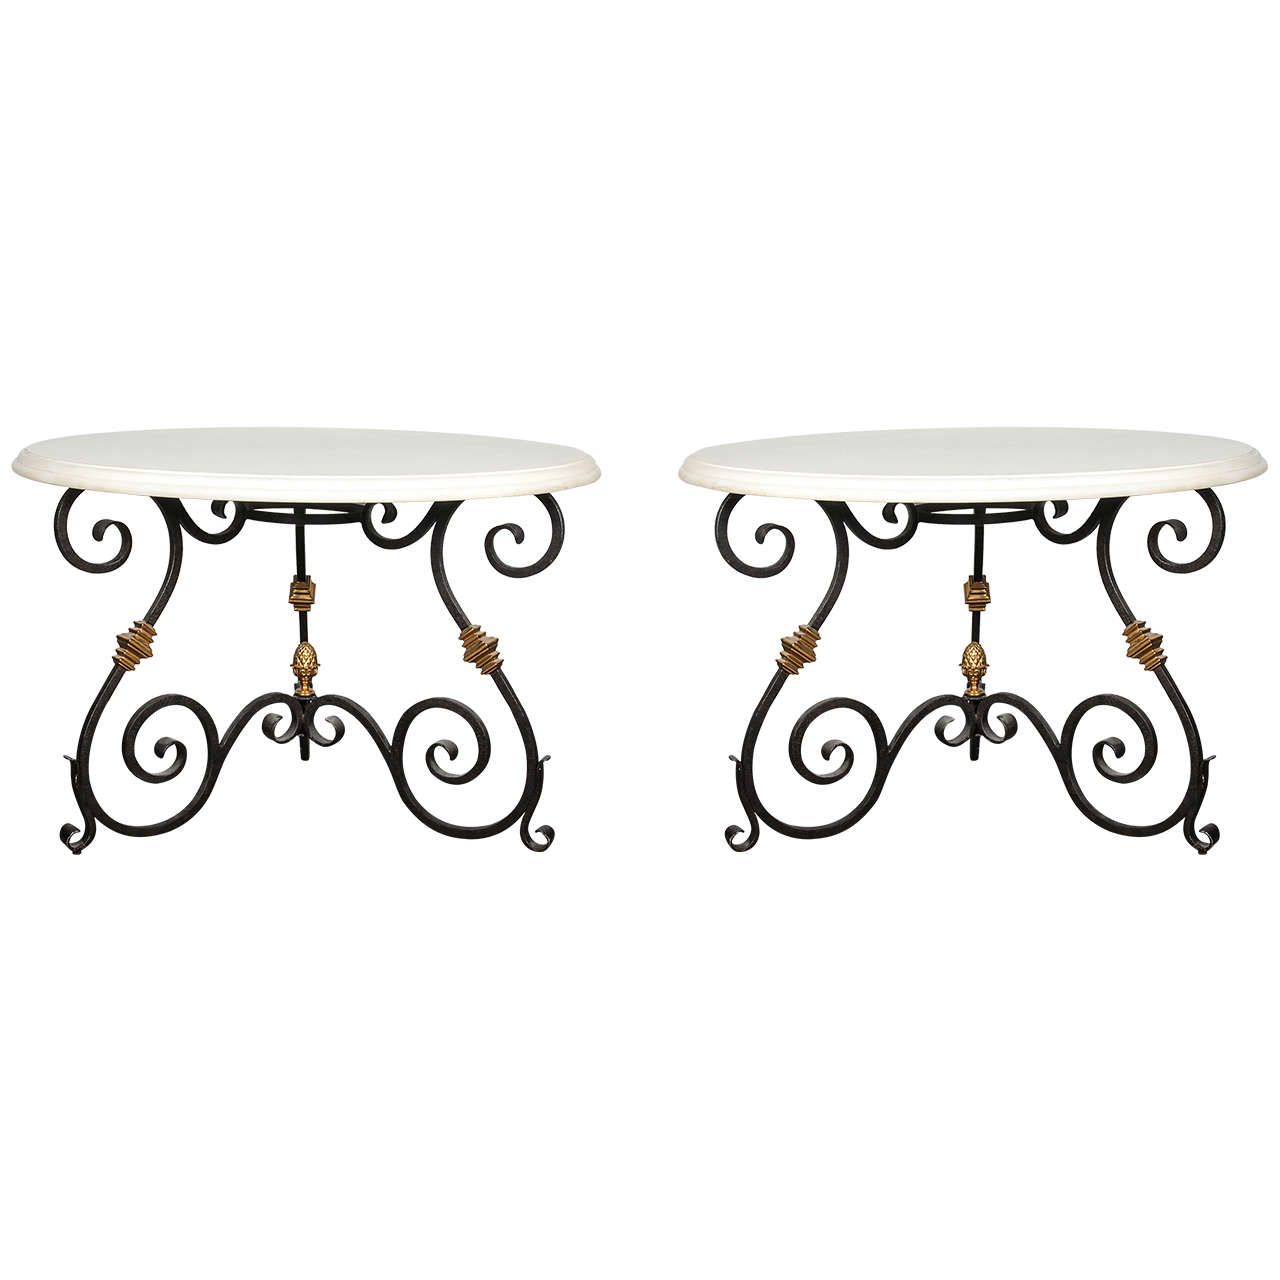 Pair of Ralph Lauren Duchess Wrought Iron Tables For Sale